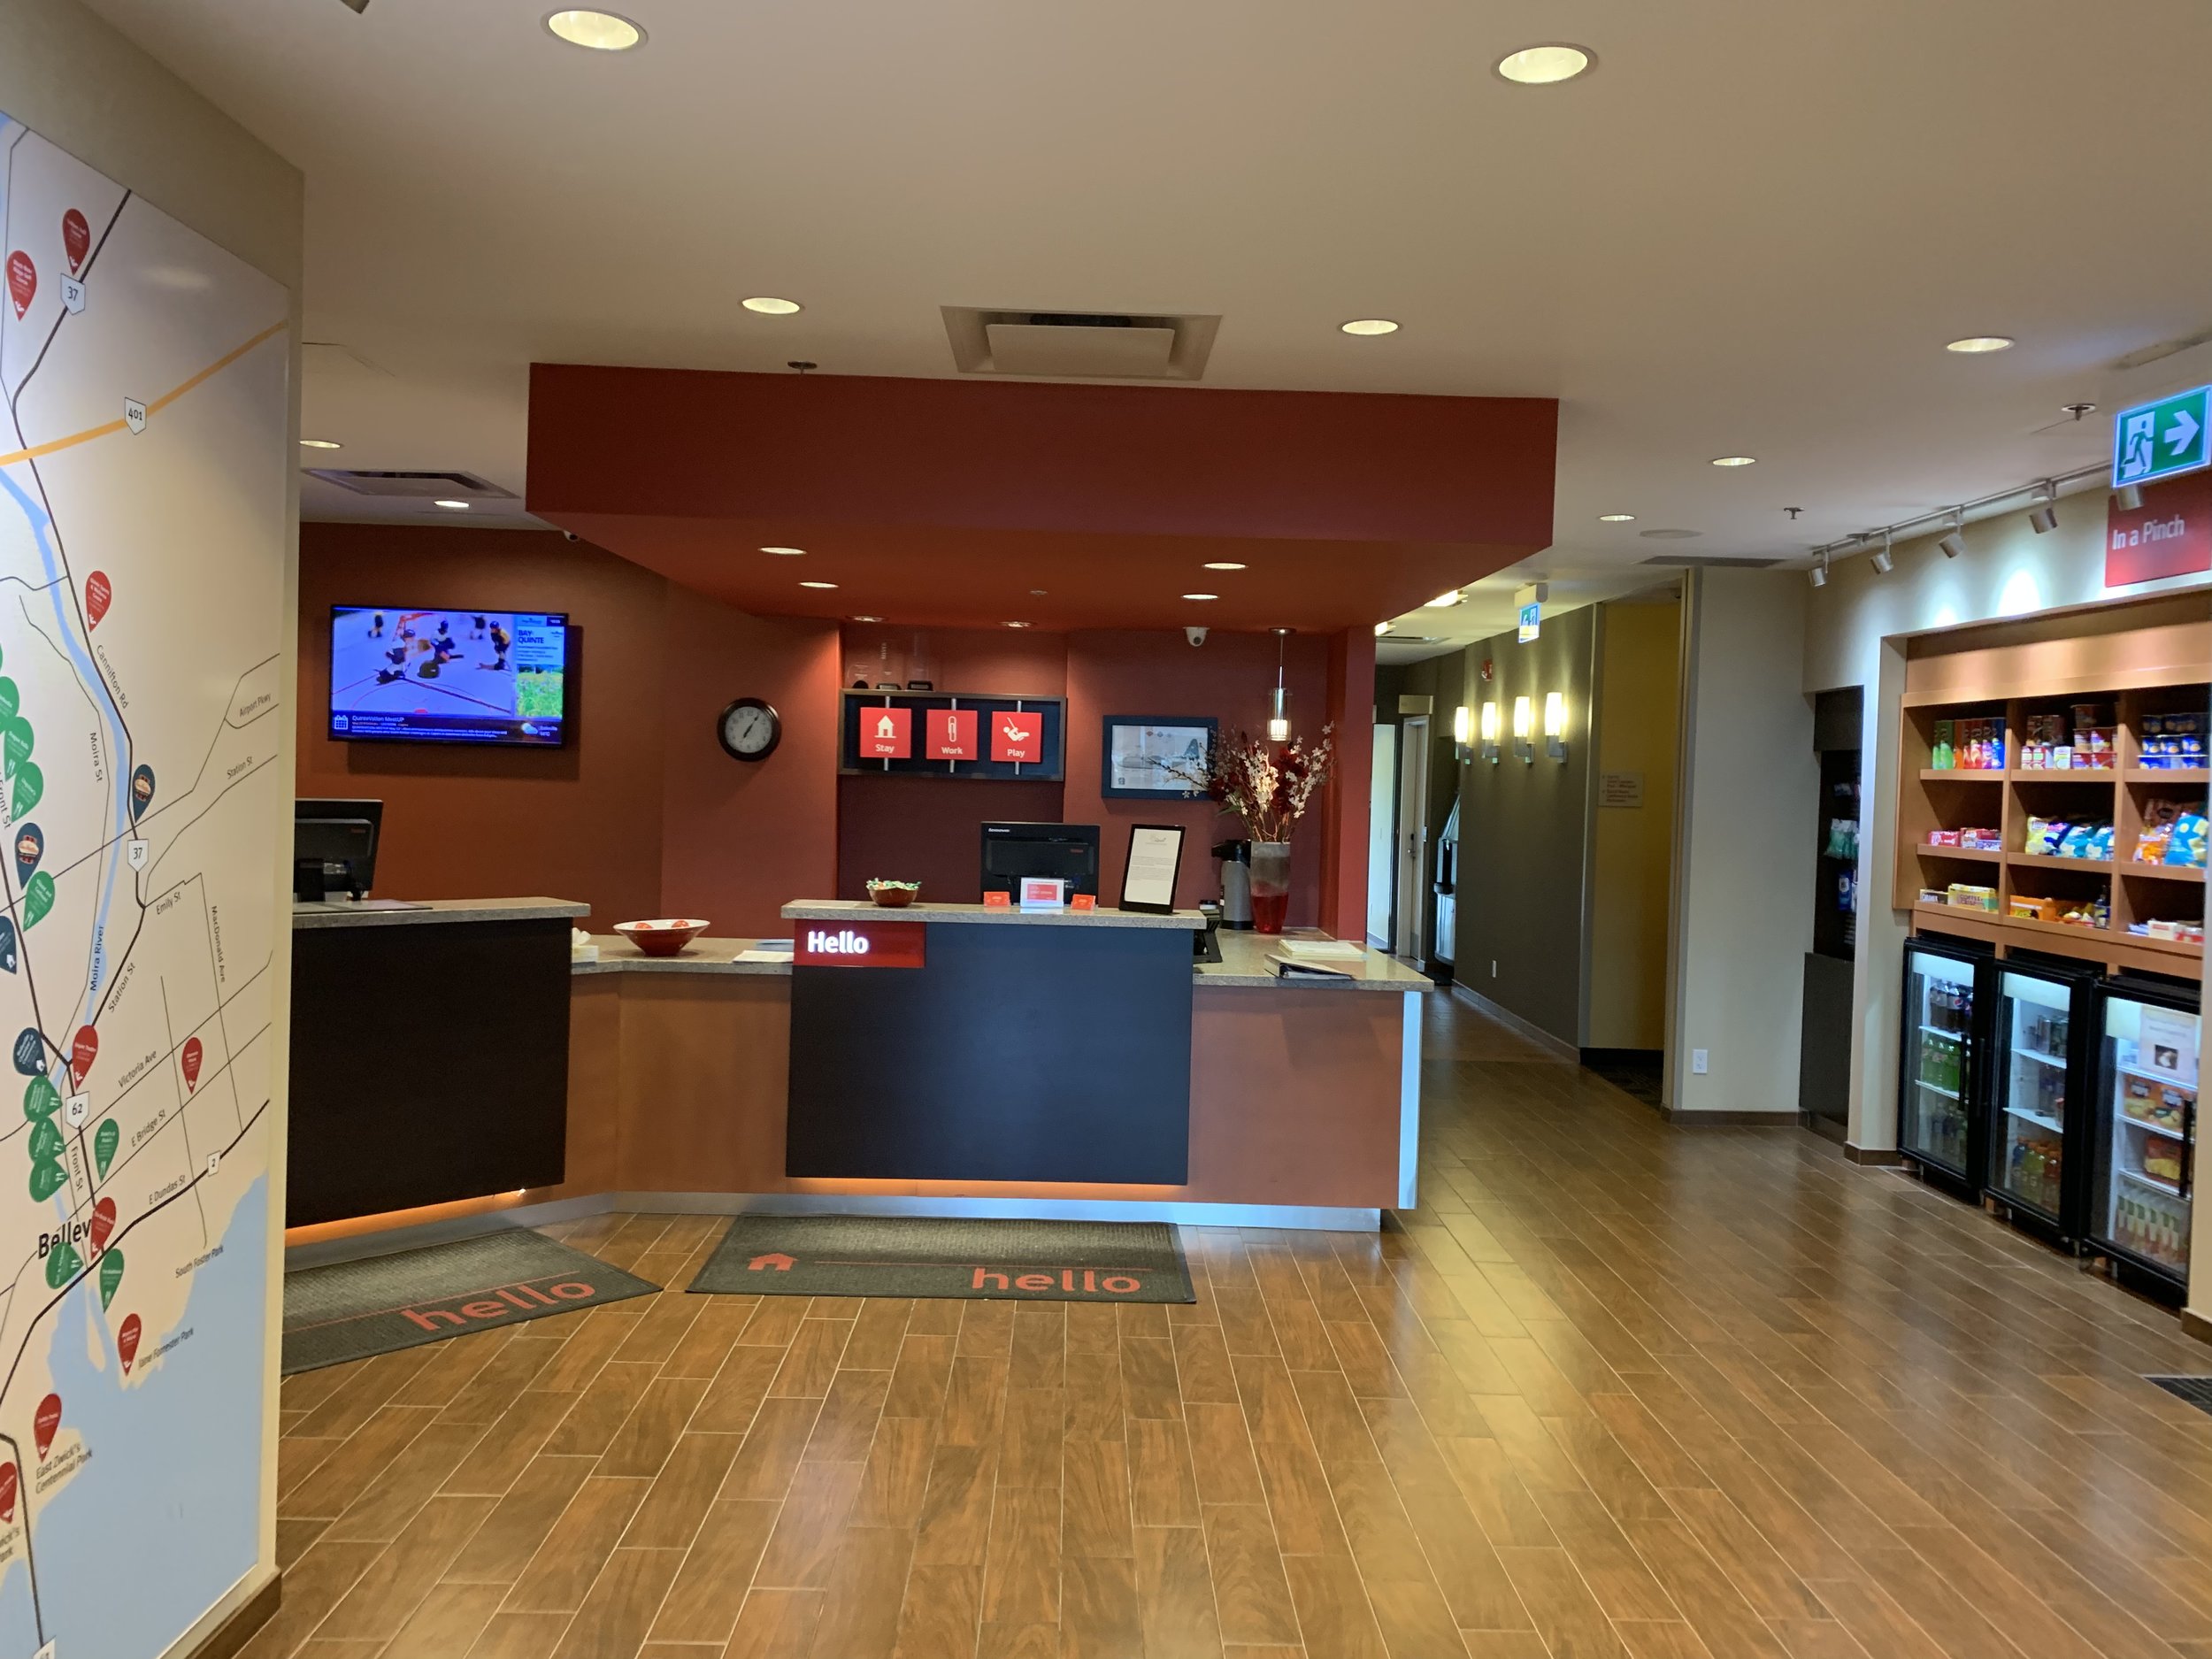  TownePlace Suites Belleville Check In Area 